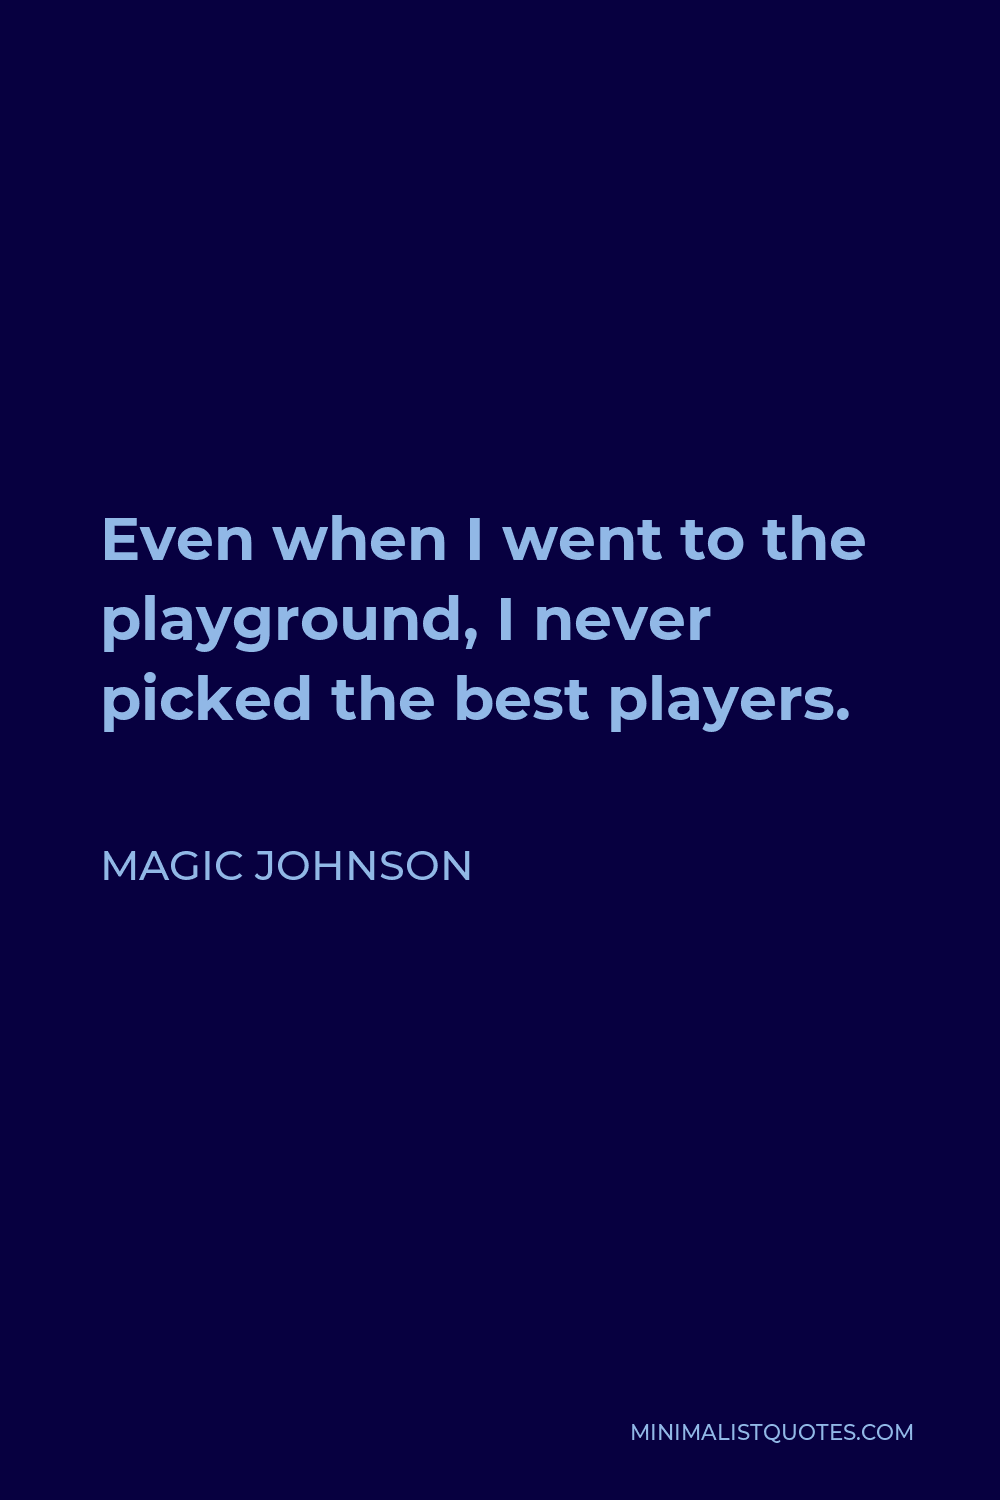 Magic Johnson Quote - Even when I went to the playground, I never picked the best players.